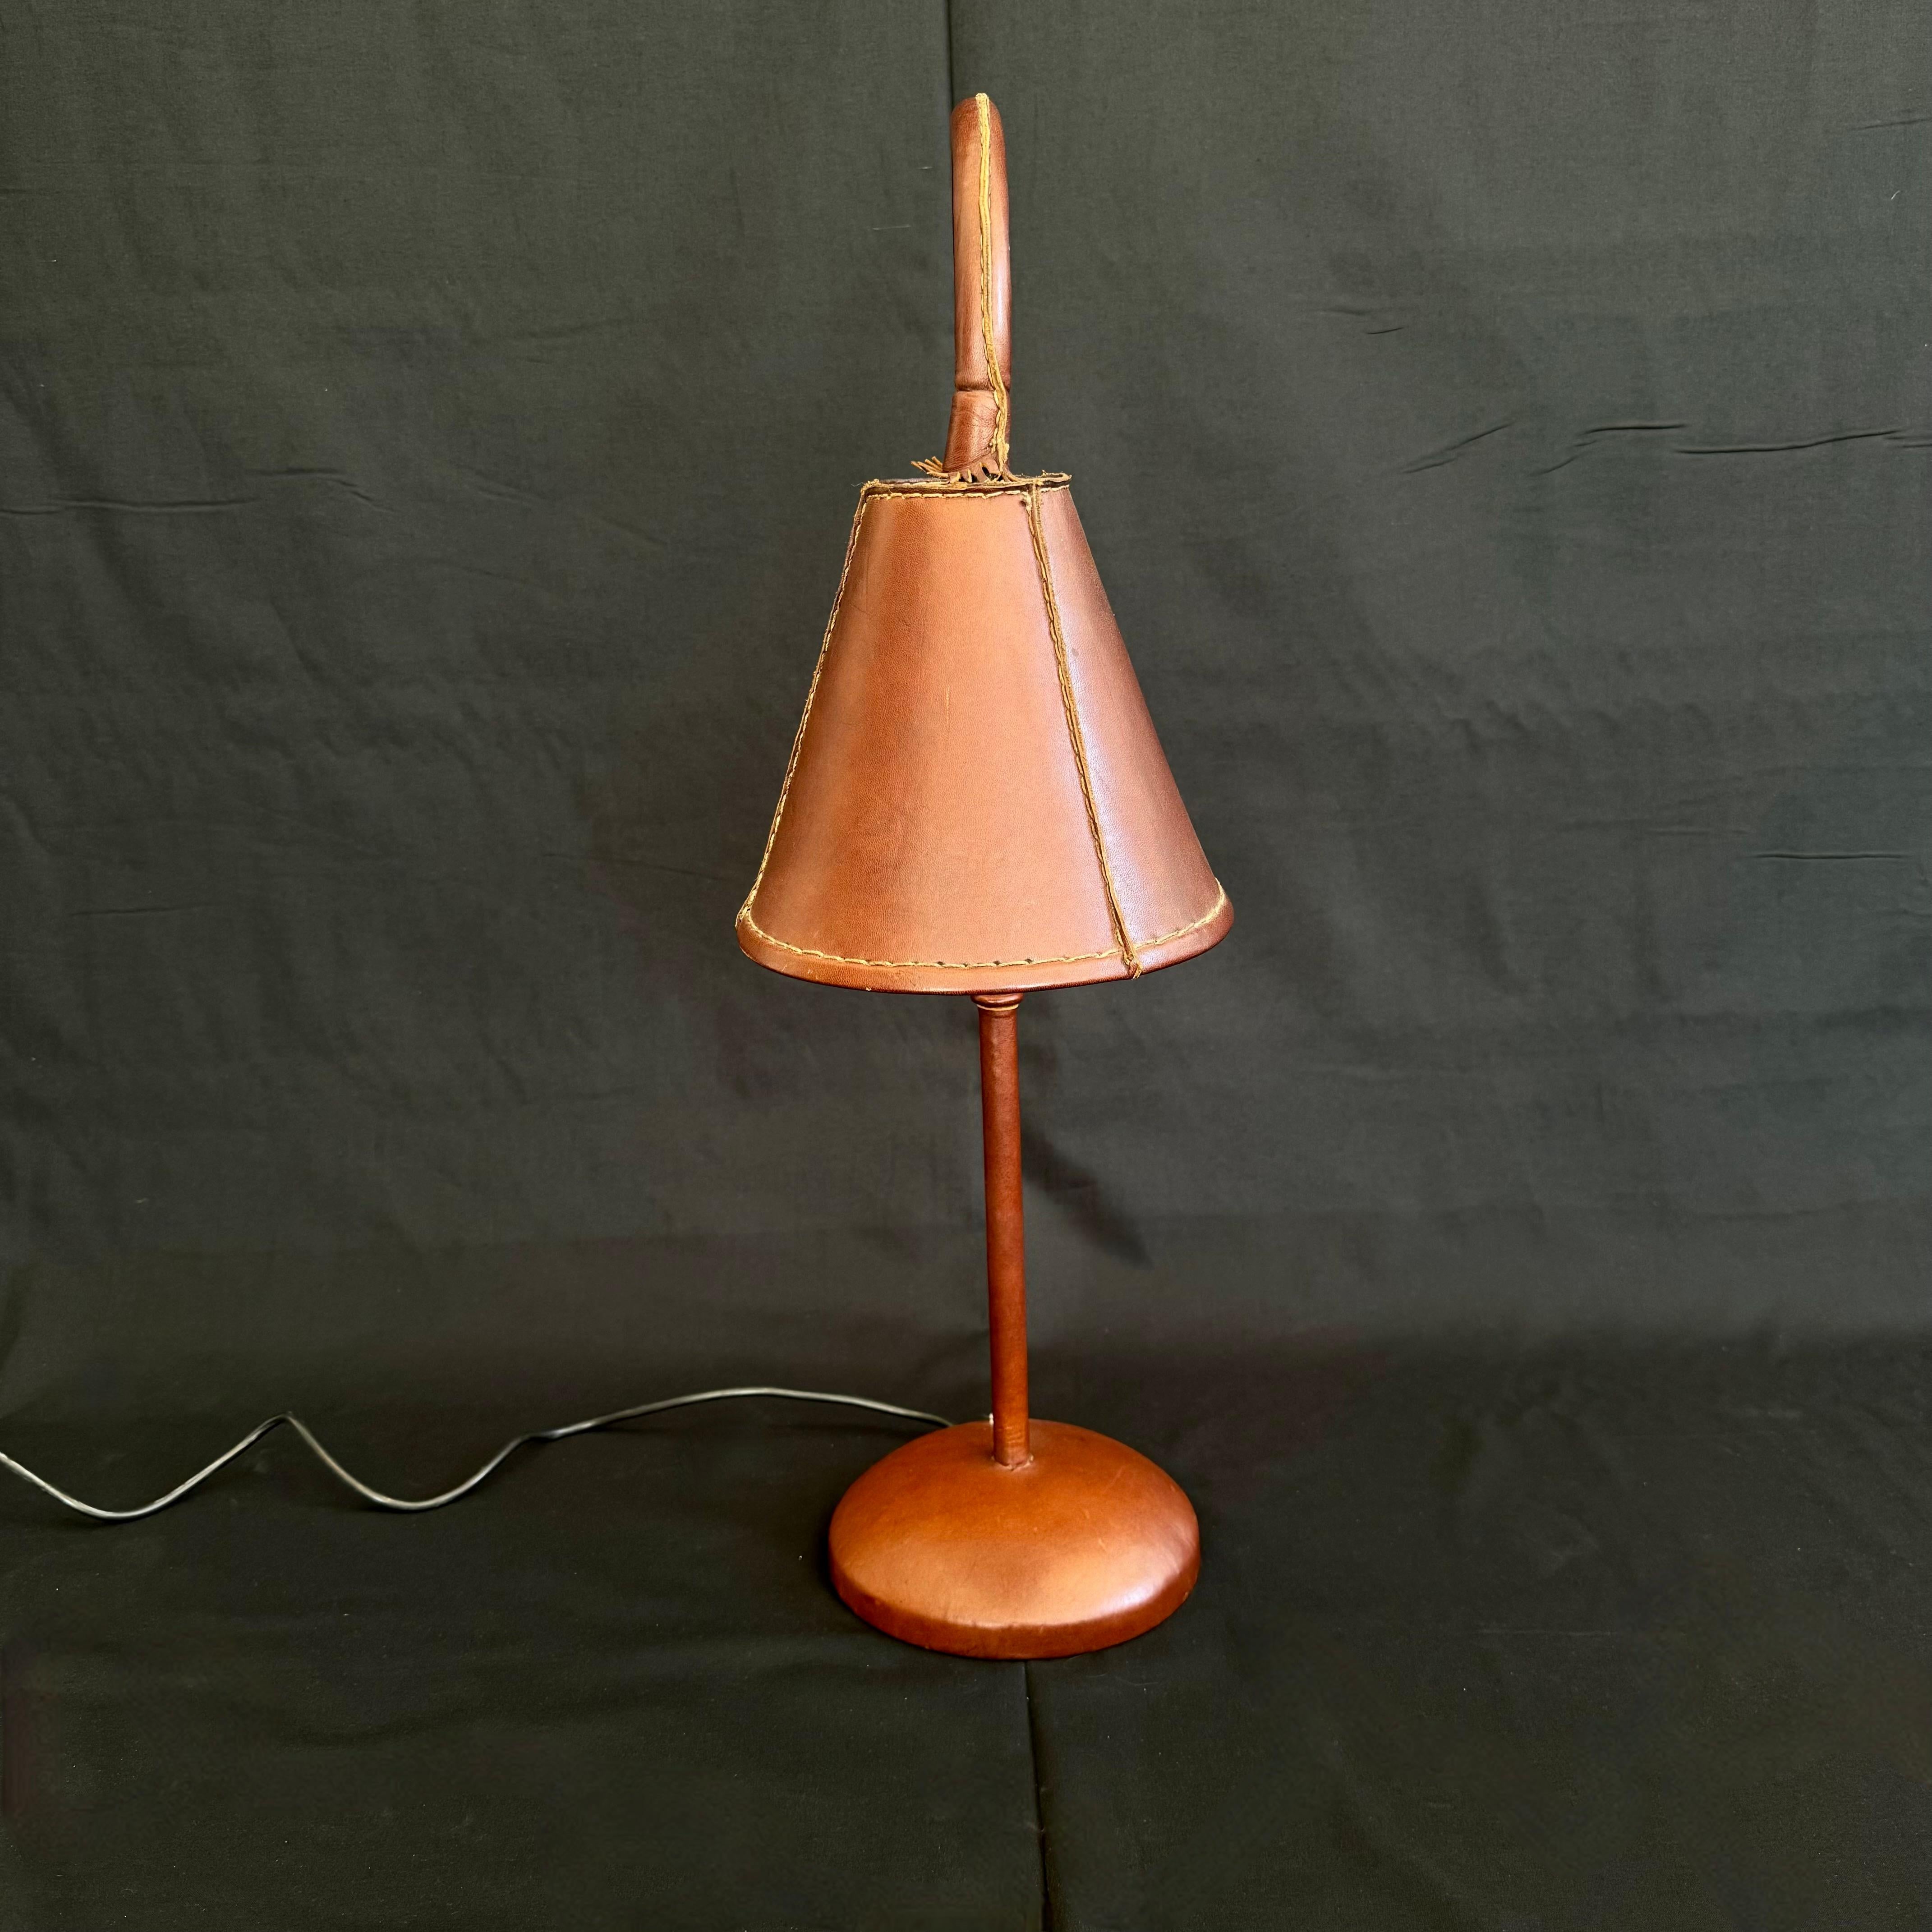 Handsome leather arched table lamp by Spanish design house, Valenti. Based in Barcelona and founded over 200 years ago, Valenti has deep roots in high end furniture and elegant designs. Made in the 1970s this table lamp is completely wrapped in an